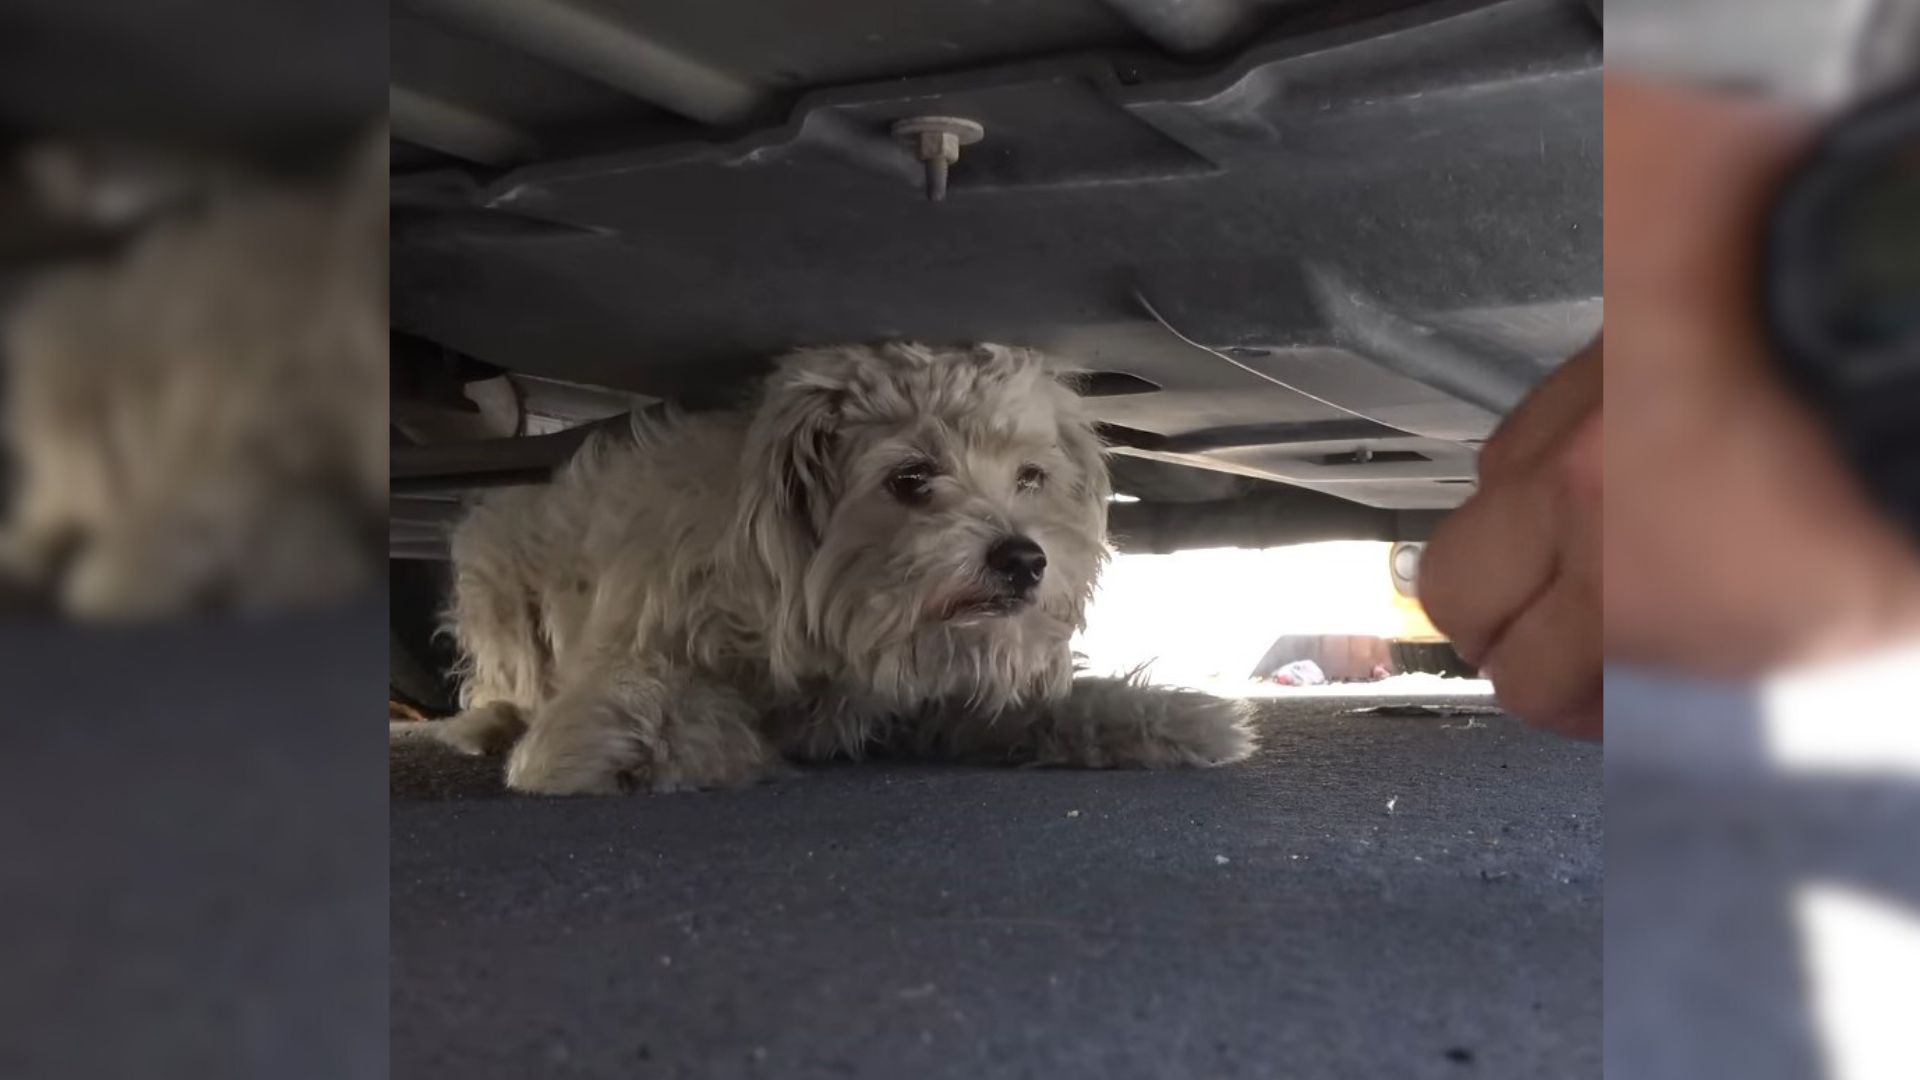 Rescuers From California Were Shocked To Find This Abandoned Pup Hiding Under A Car